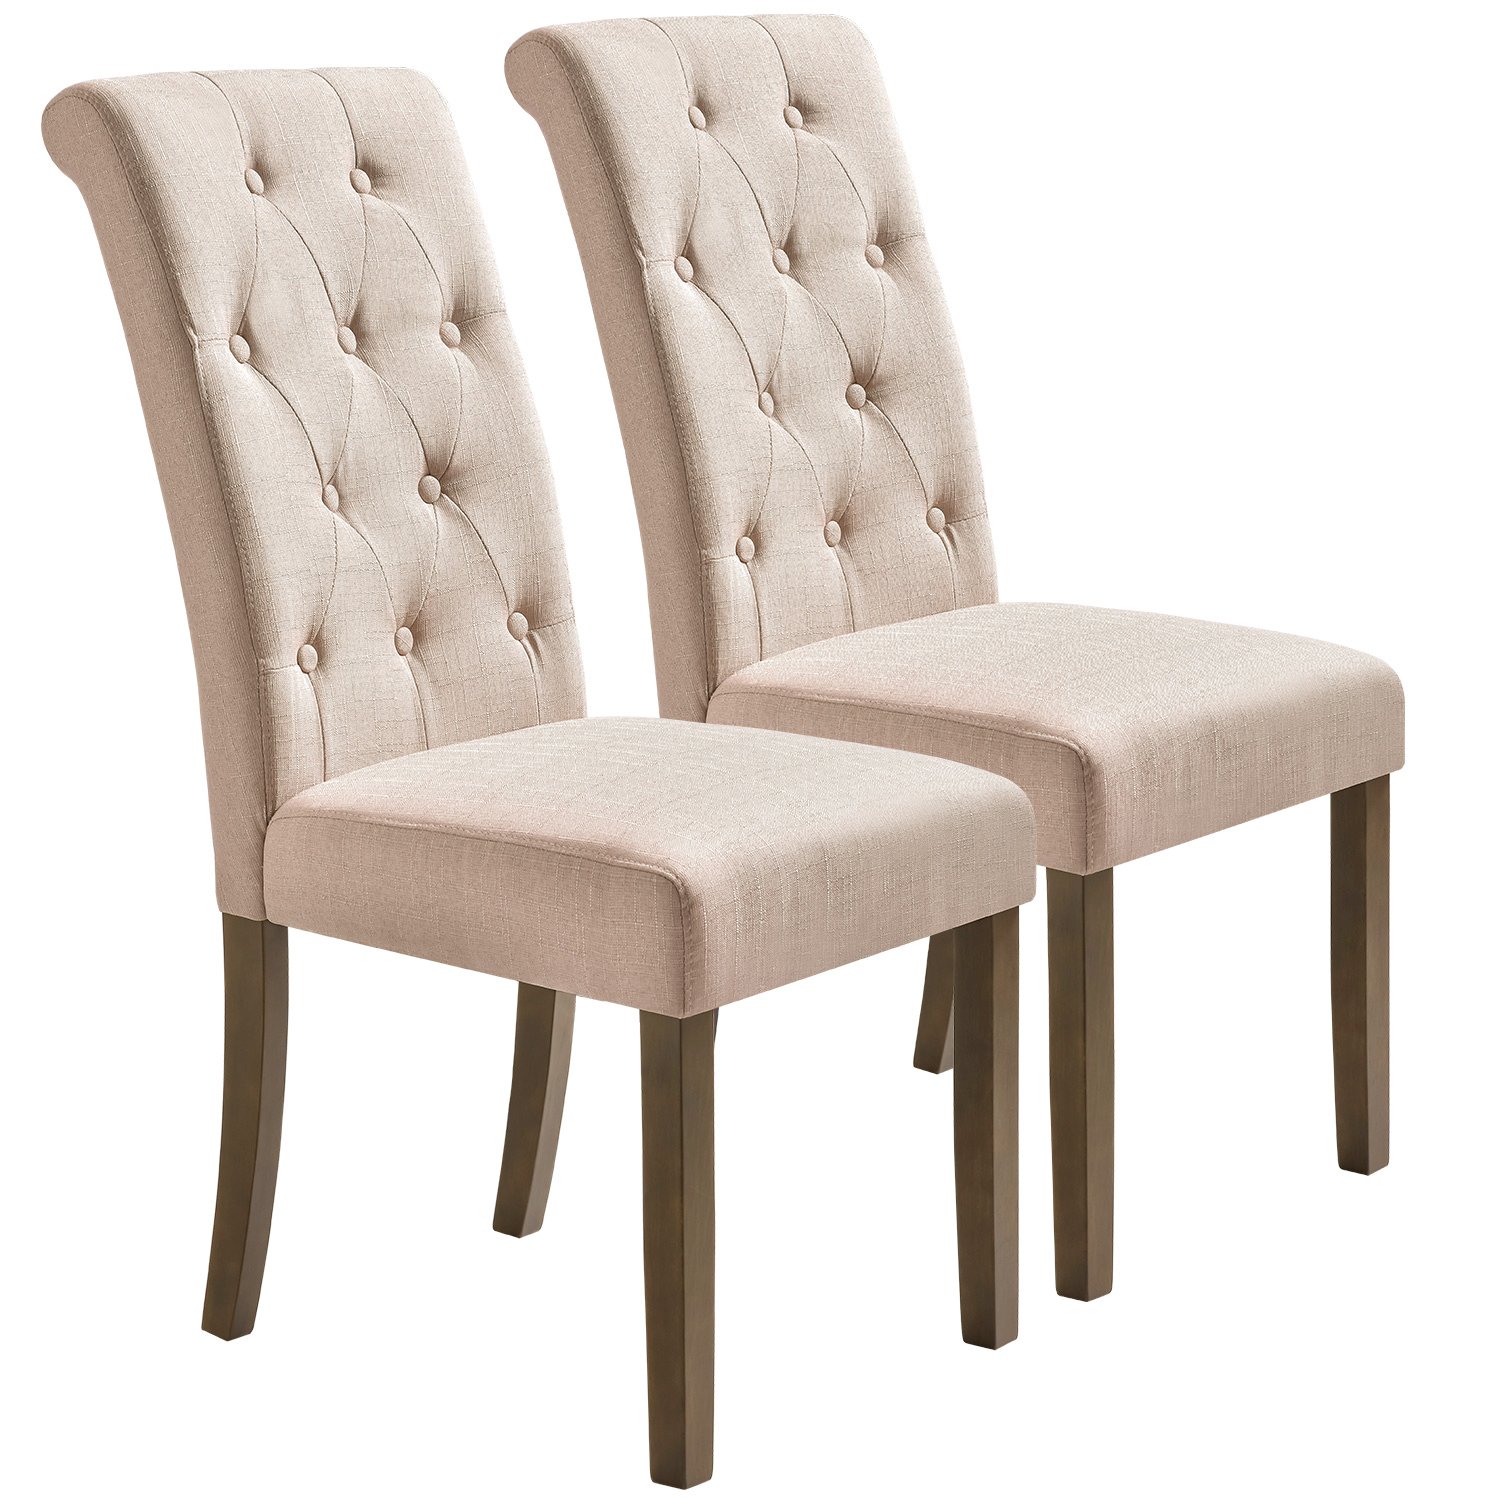 Aristocratic Style Dining Chair Noble and Elegant Solid Wood Tufted Dining Chair Dining Room Set (Set of 2)-CASAINC